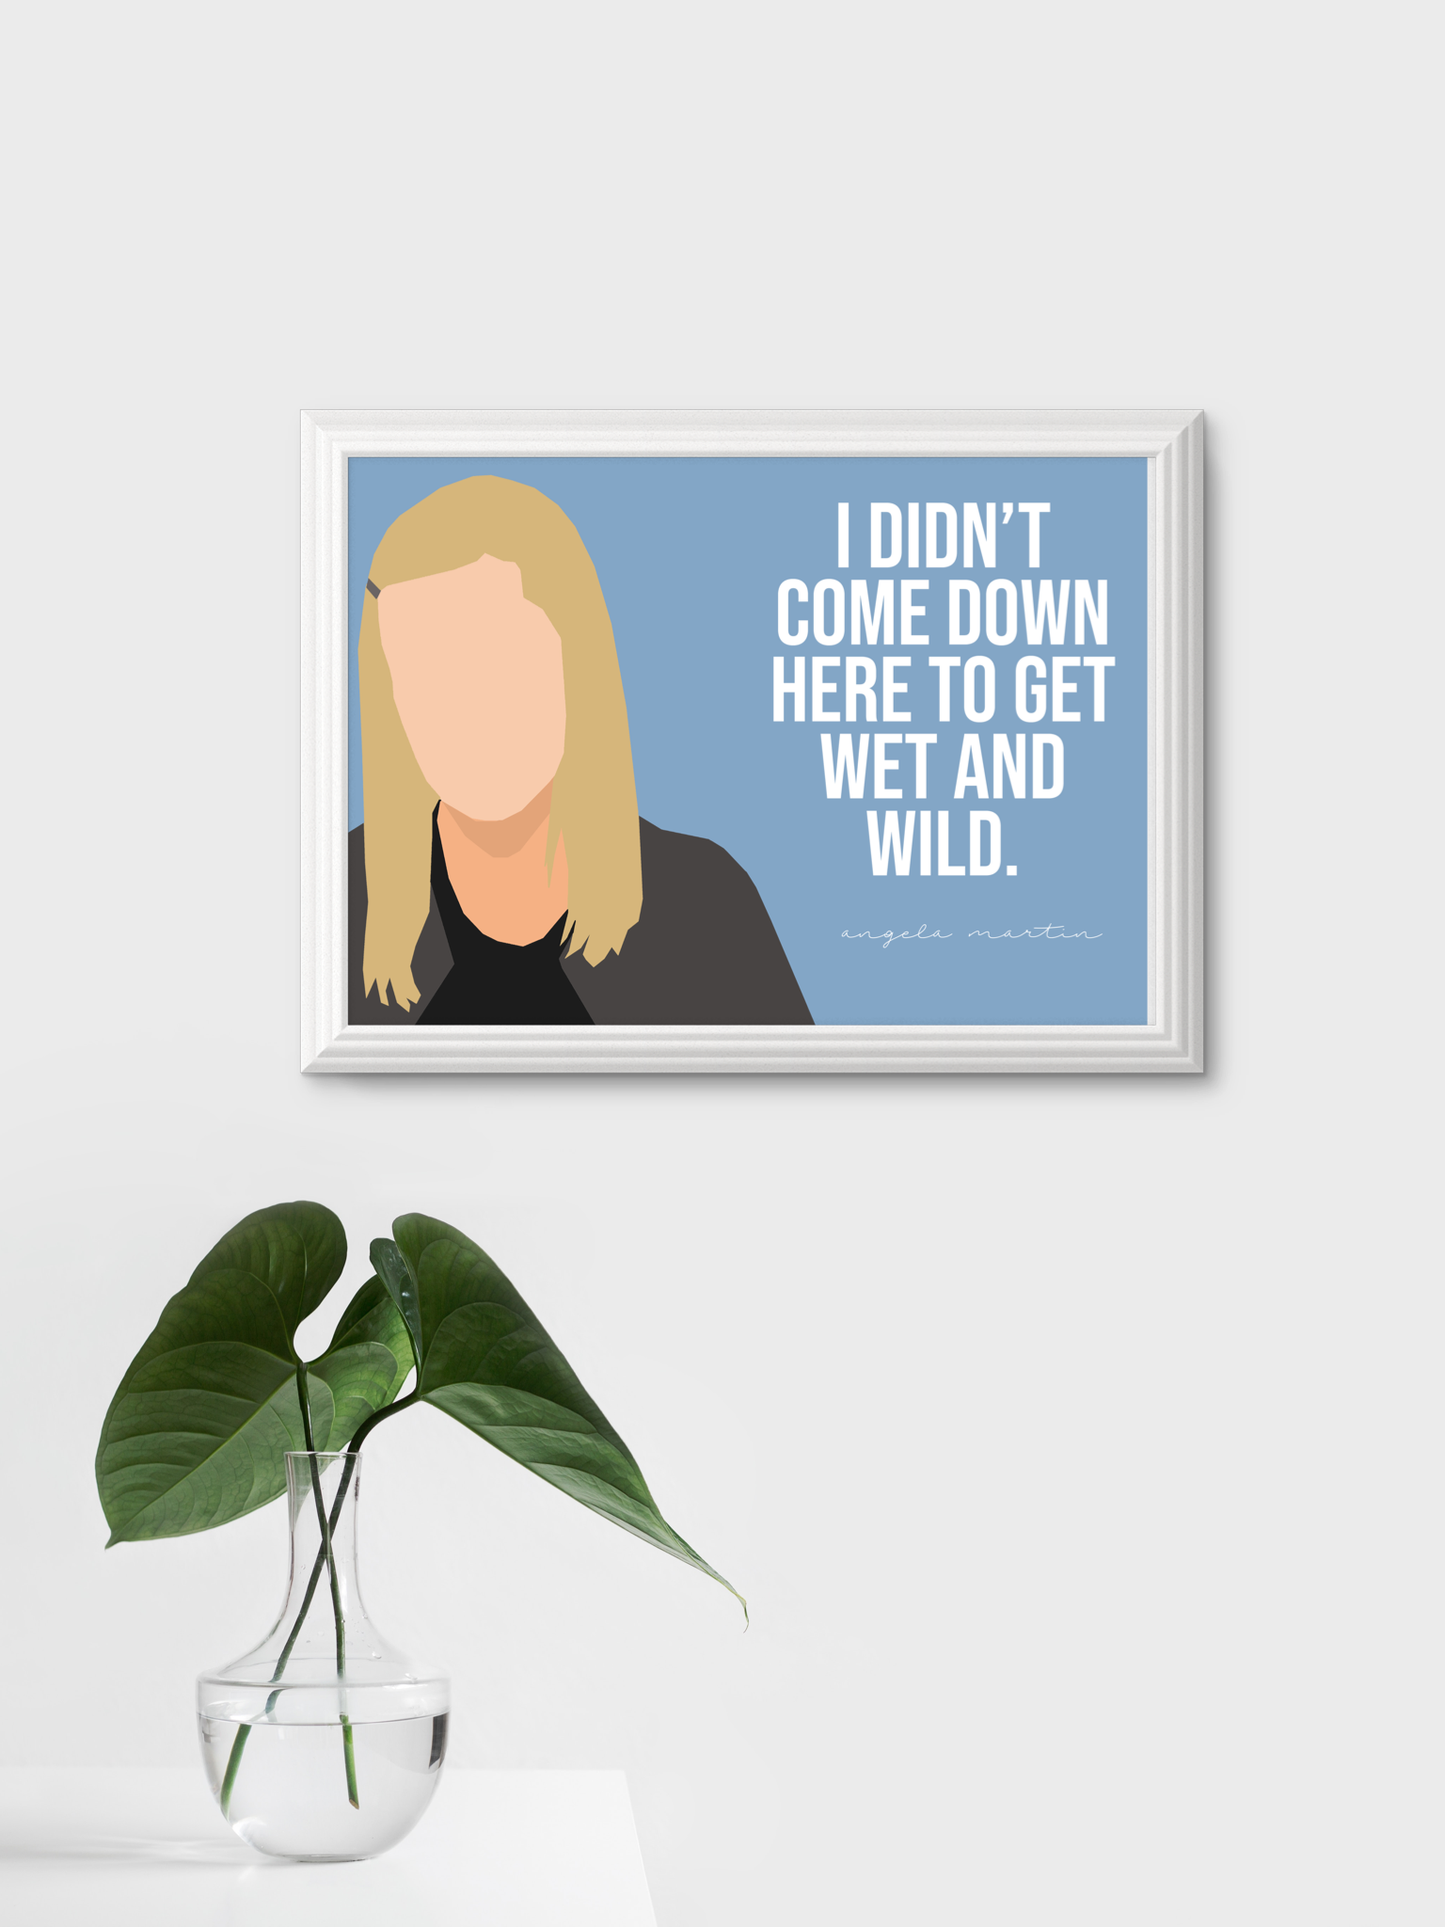 "I didn't come down here to get wet and wild." - Angela Martin. The Office